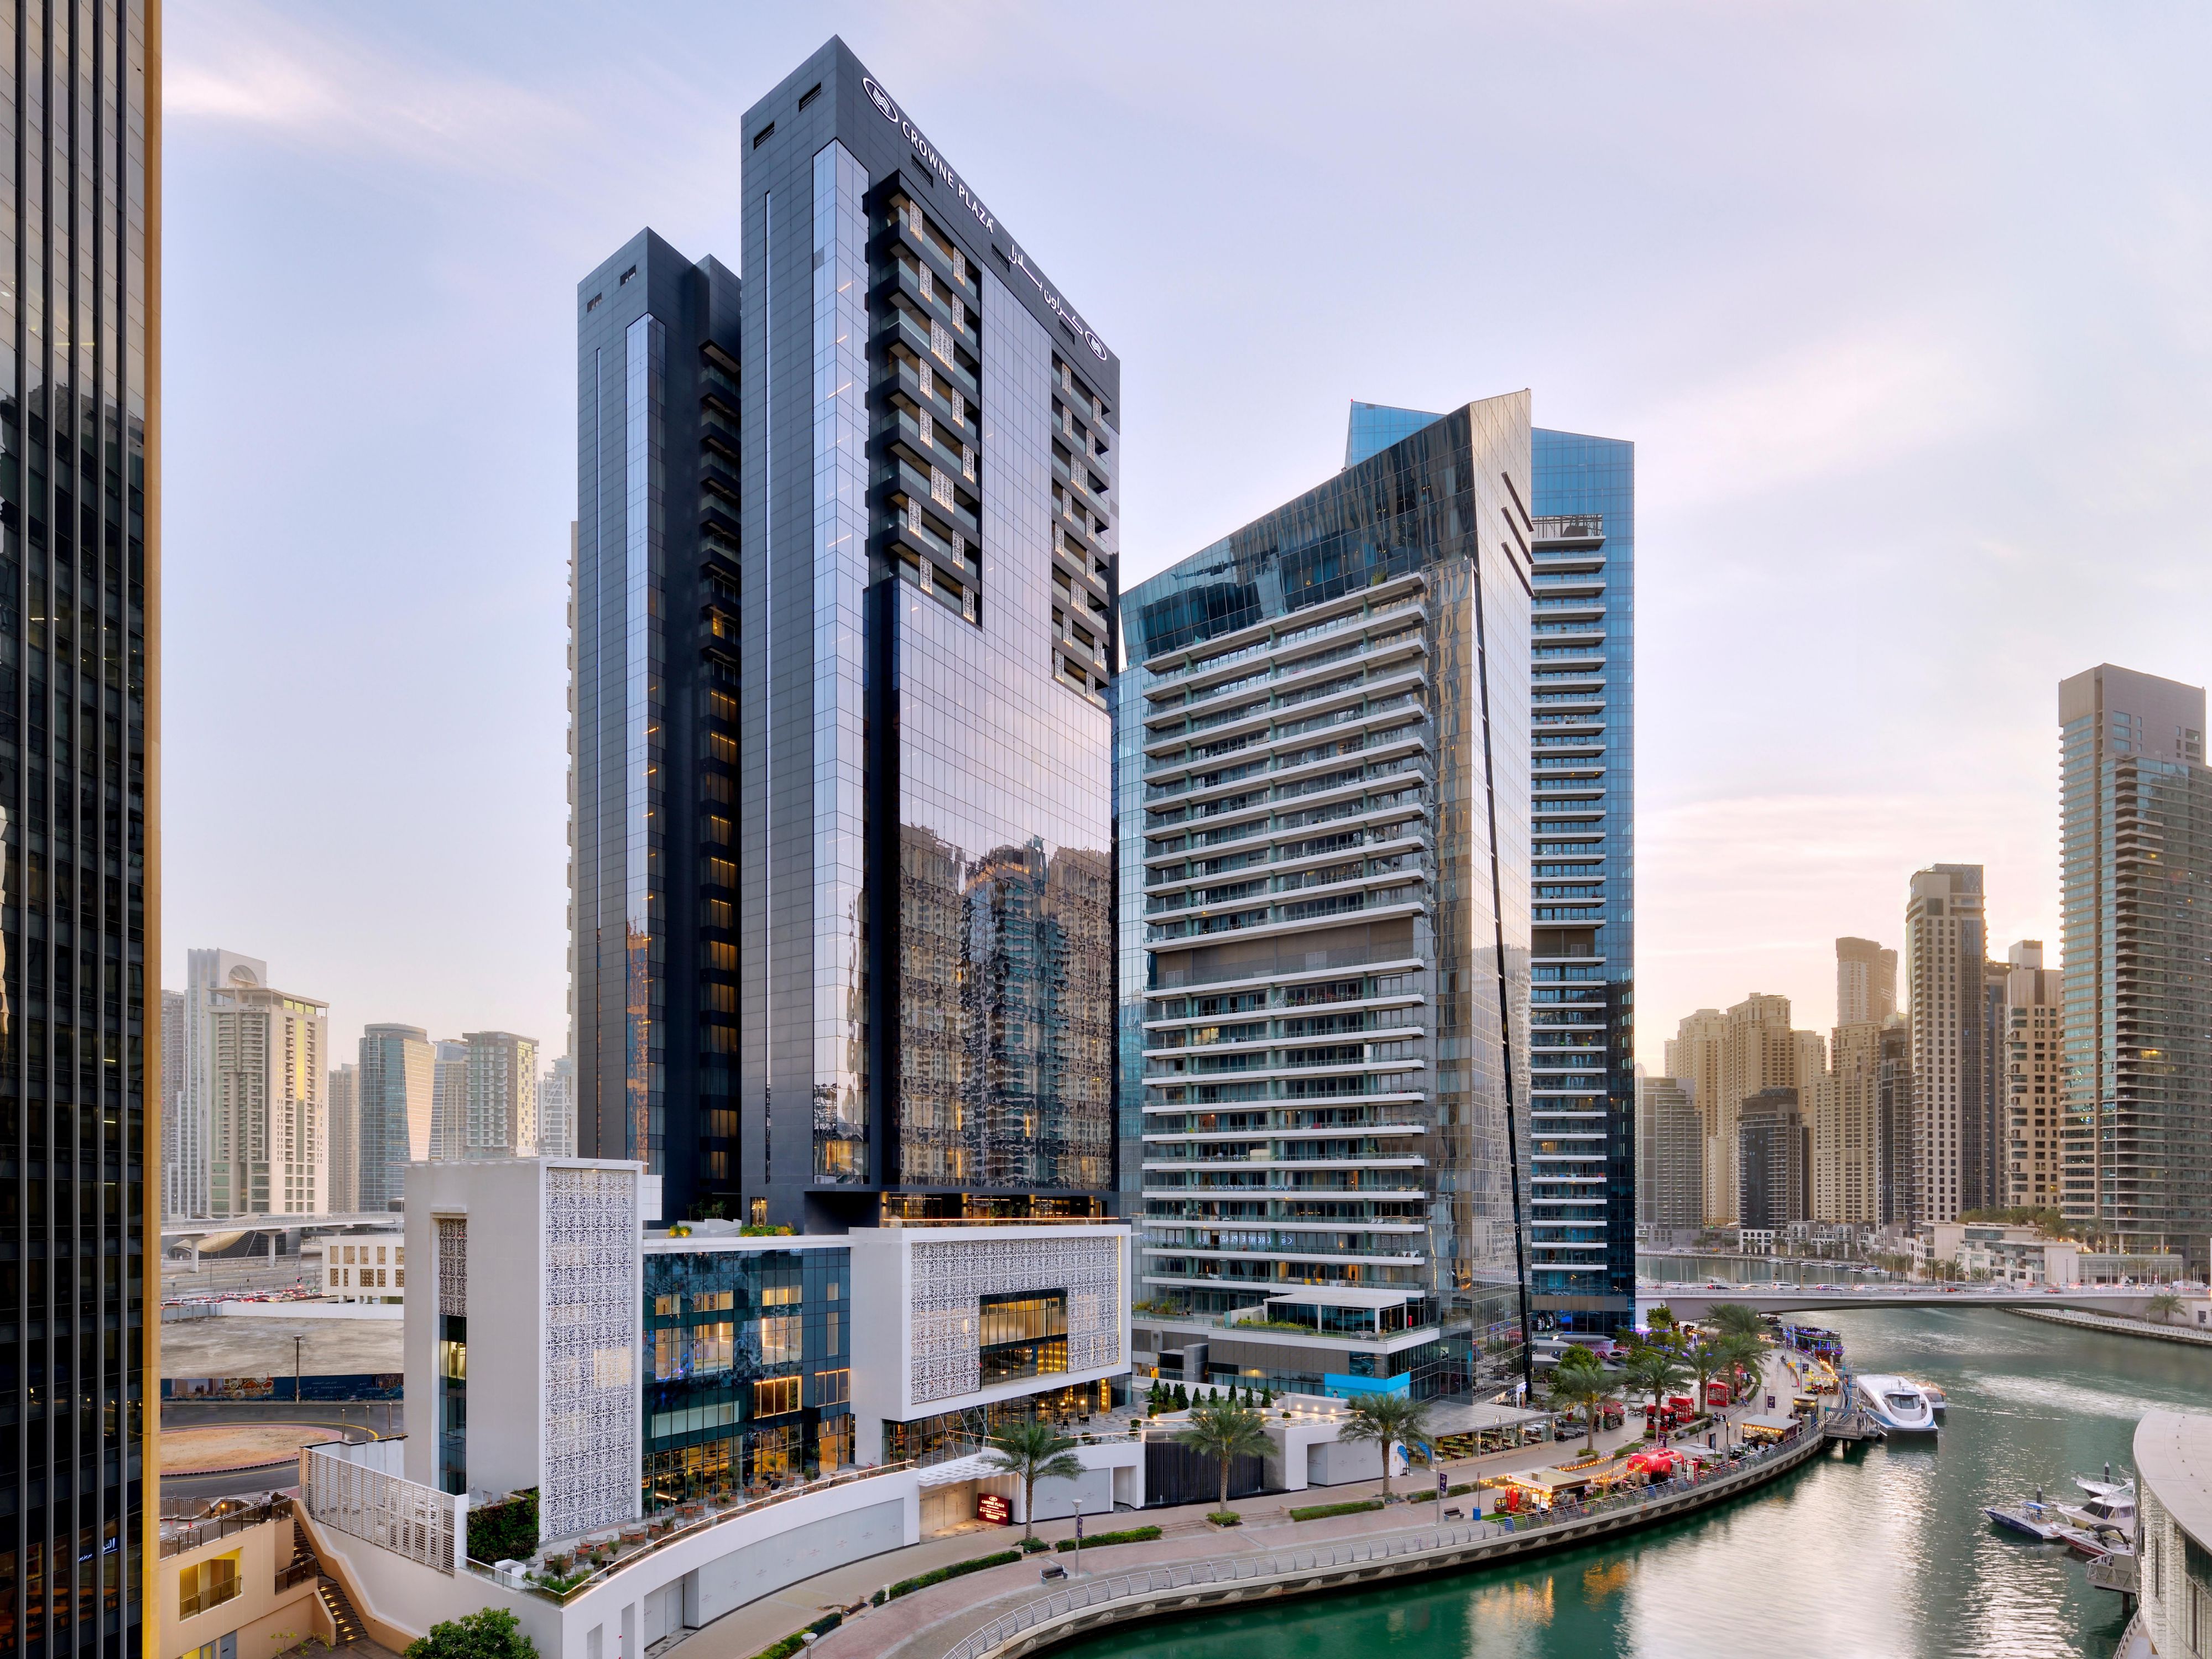 Crowne Plaza® Dubai Marina is both a business class hotel for guests seeking flexibility and balance. The hotel is located in Dubai Marina next to Dubai Marina Mall with direct access to the promenade and five mins away from the metro station.